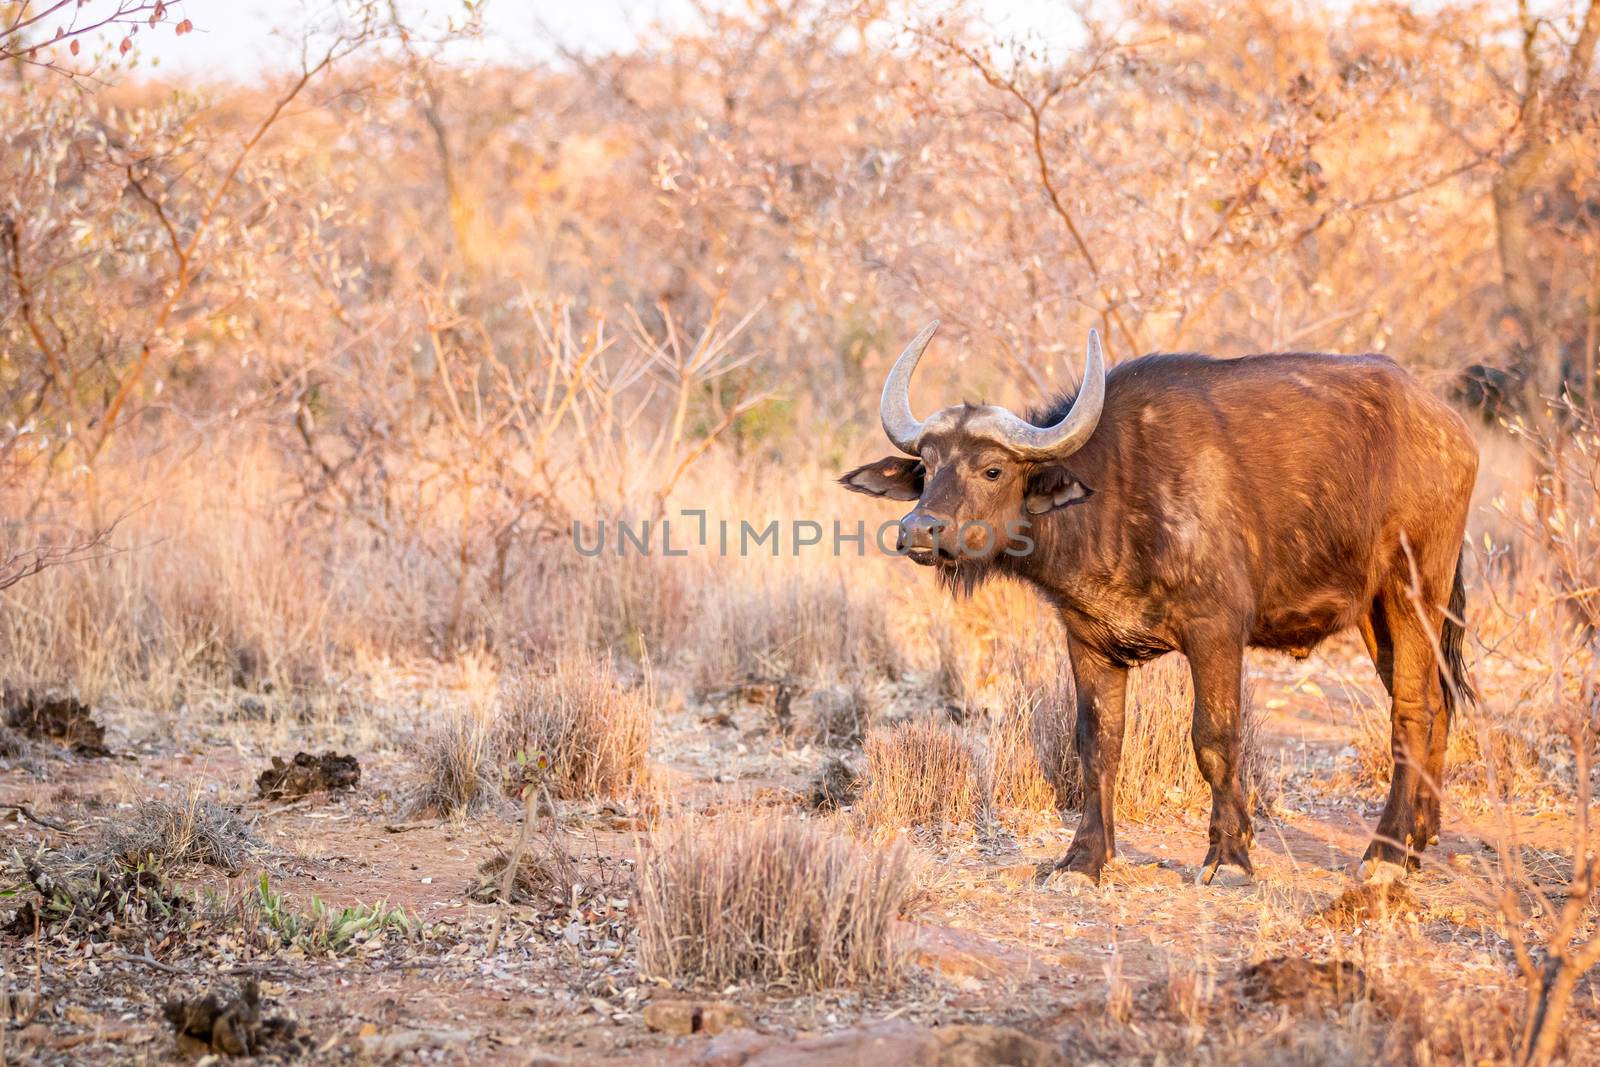 African buffalo standing in the grass in the Welgevonden game reserve, South Africa.